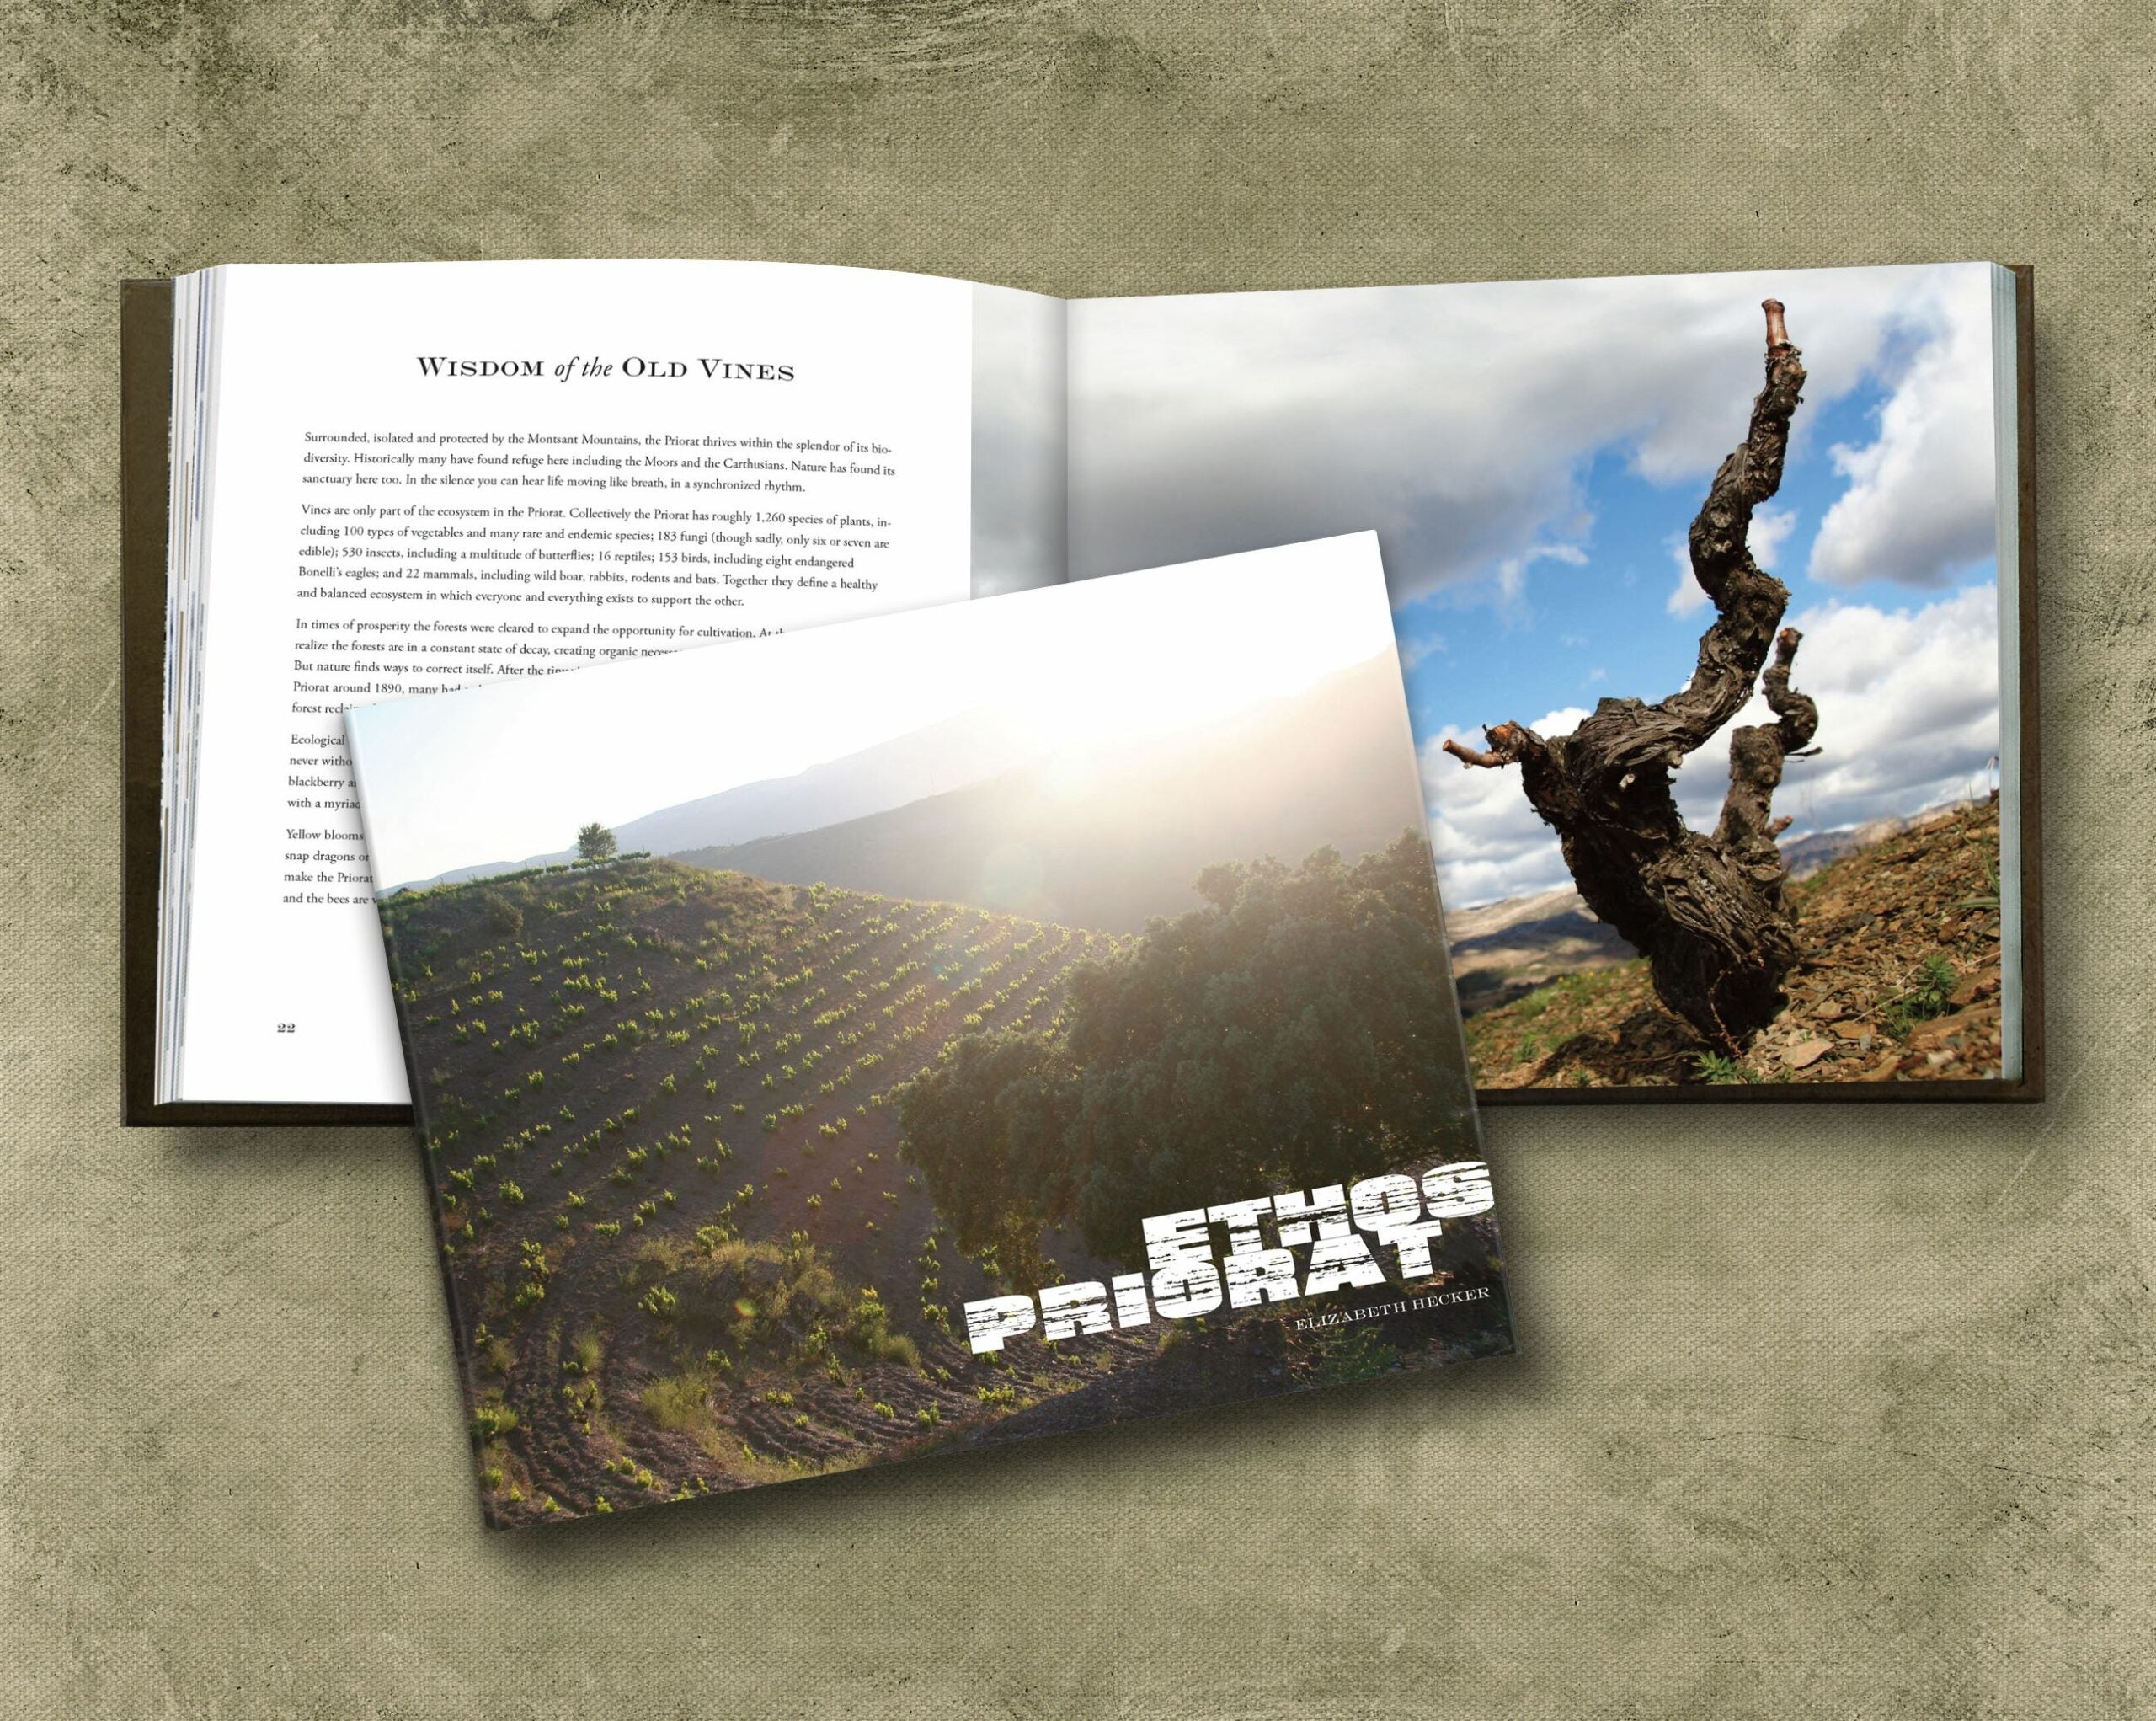 Ethos Priorat – a project 15 years in the making